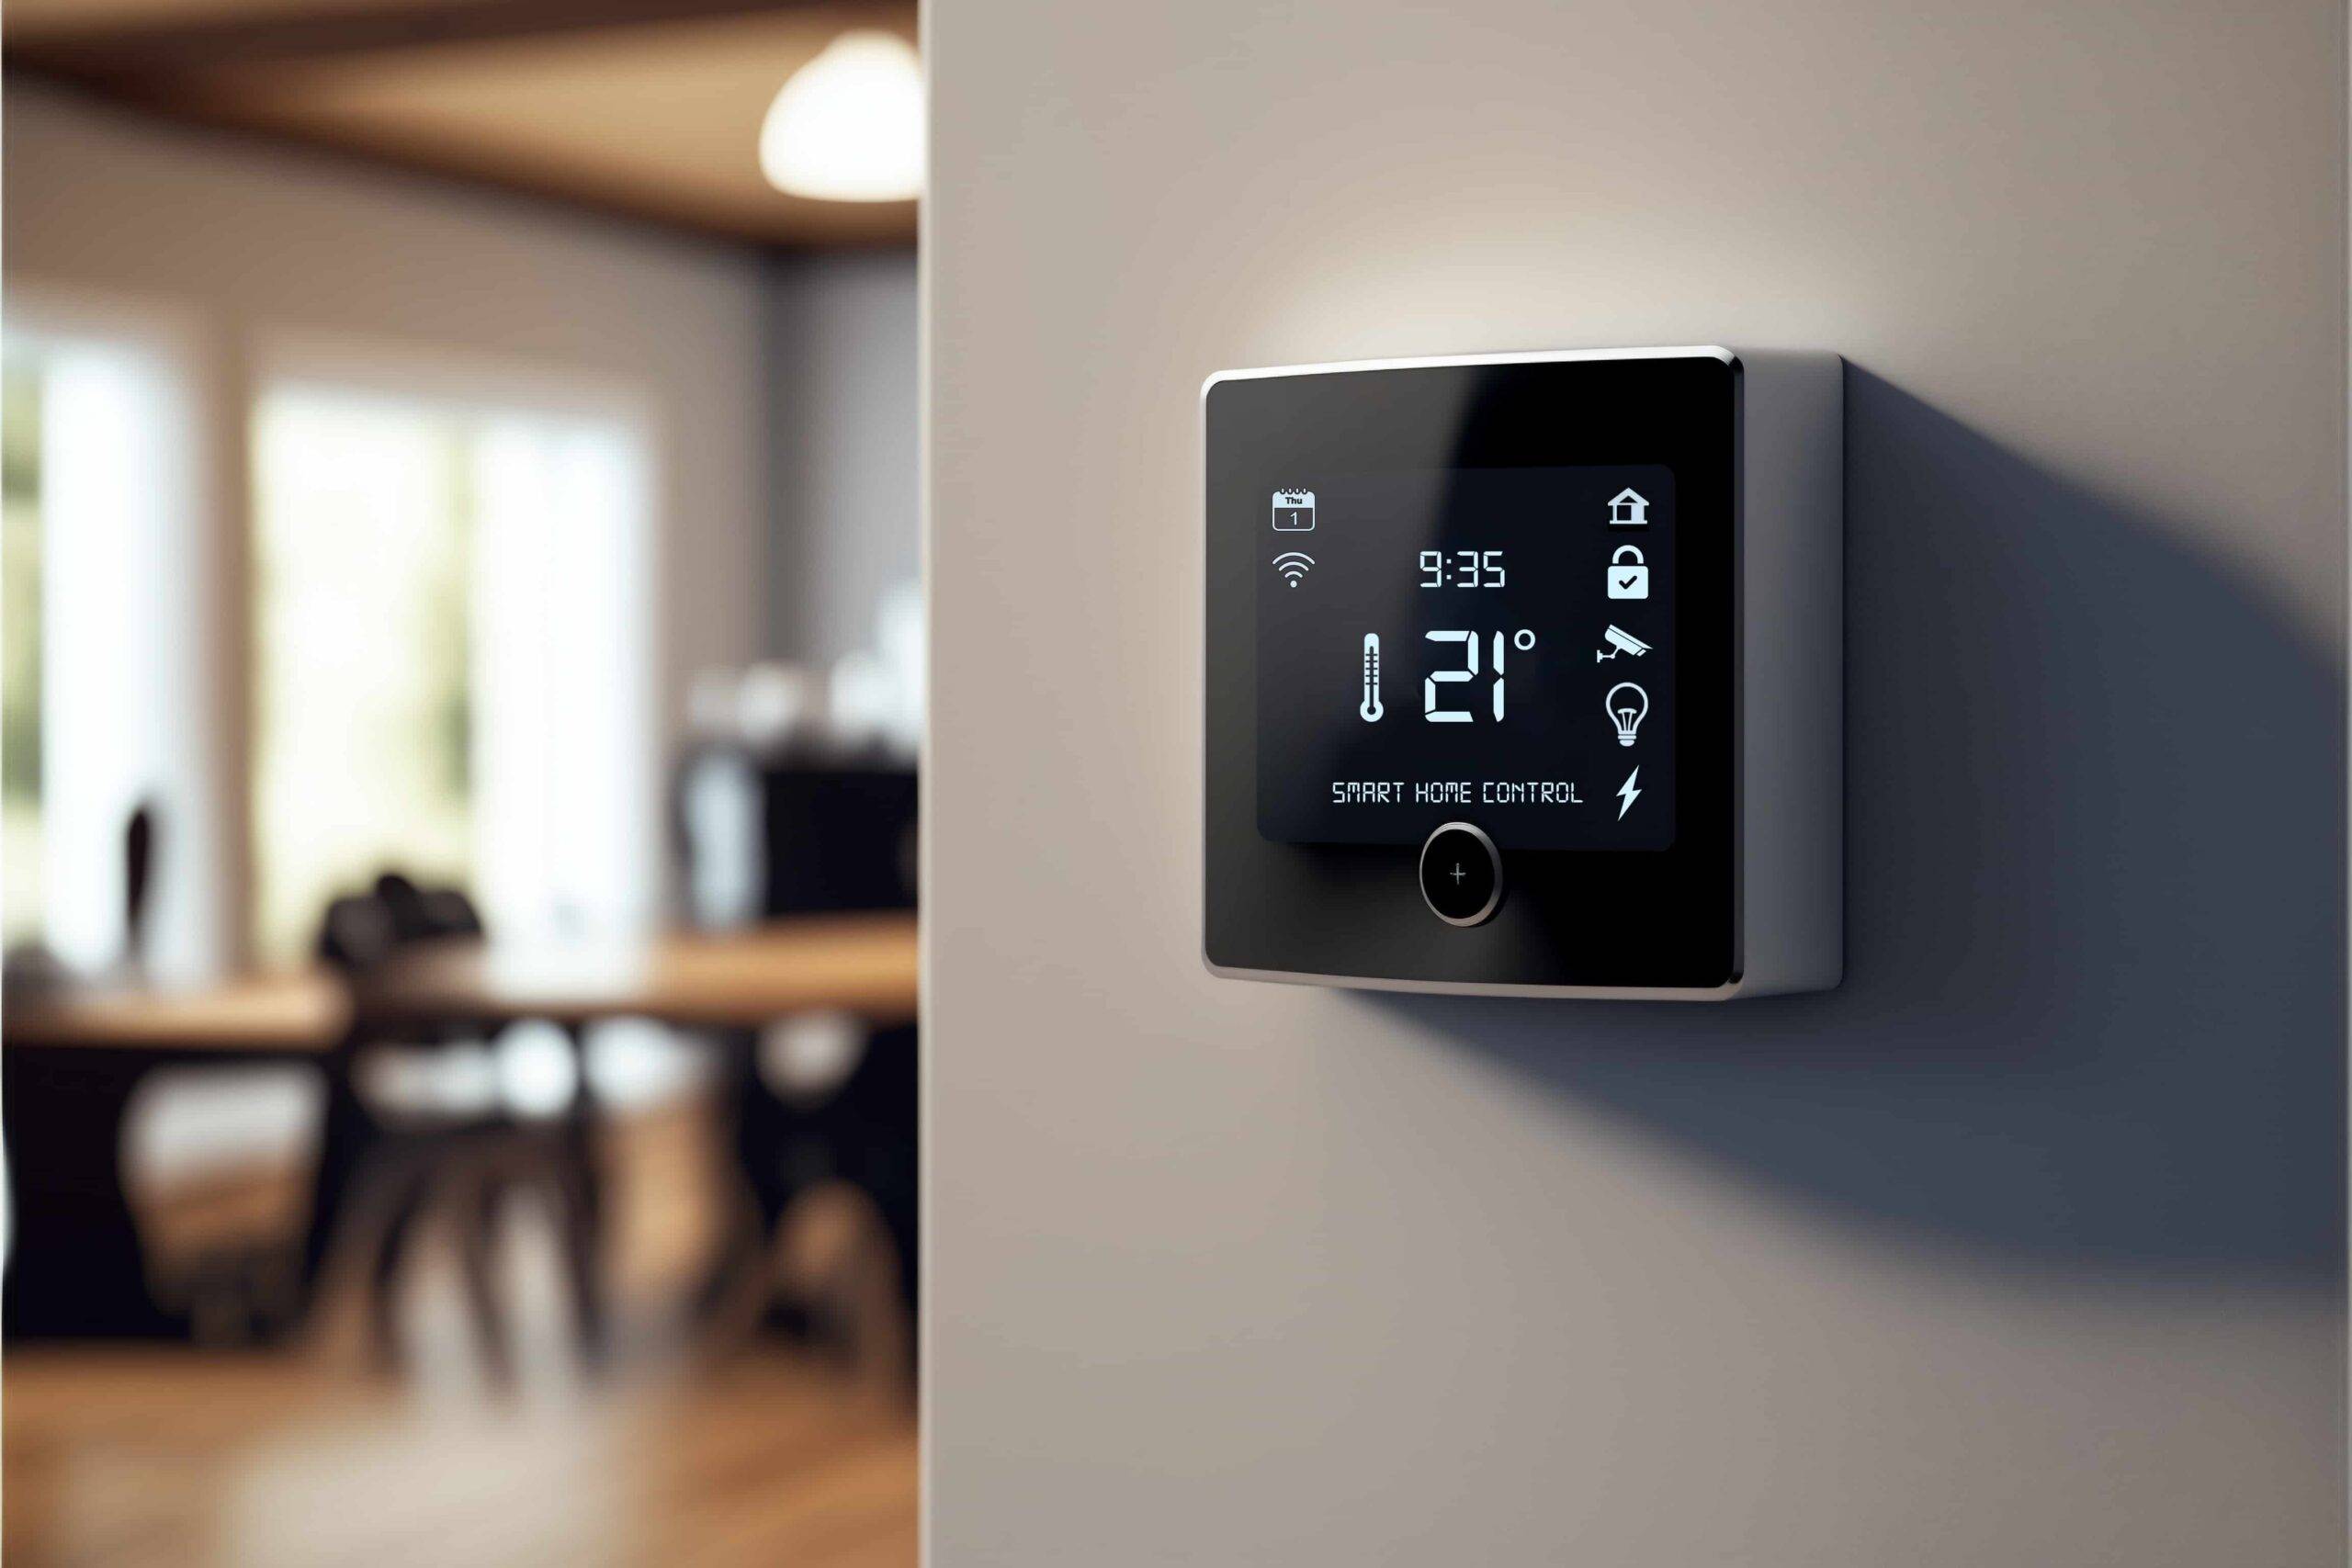 Smart Home control system. Thermostat and security